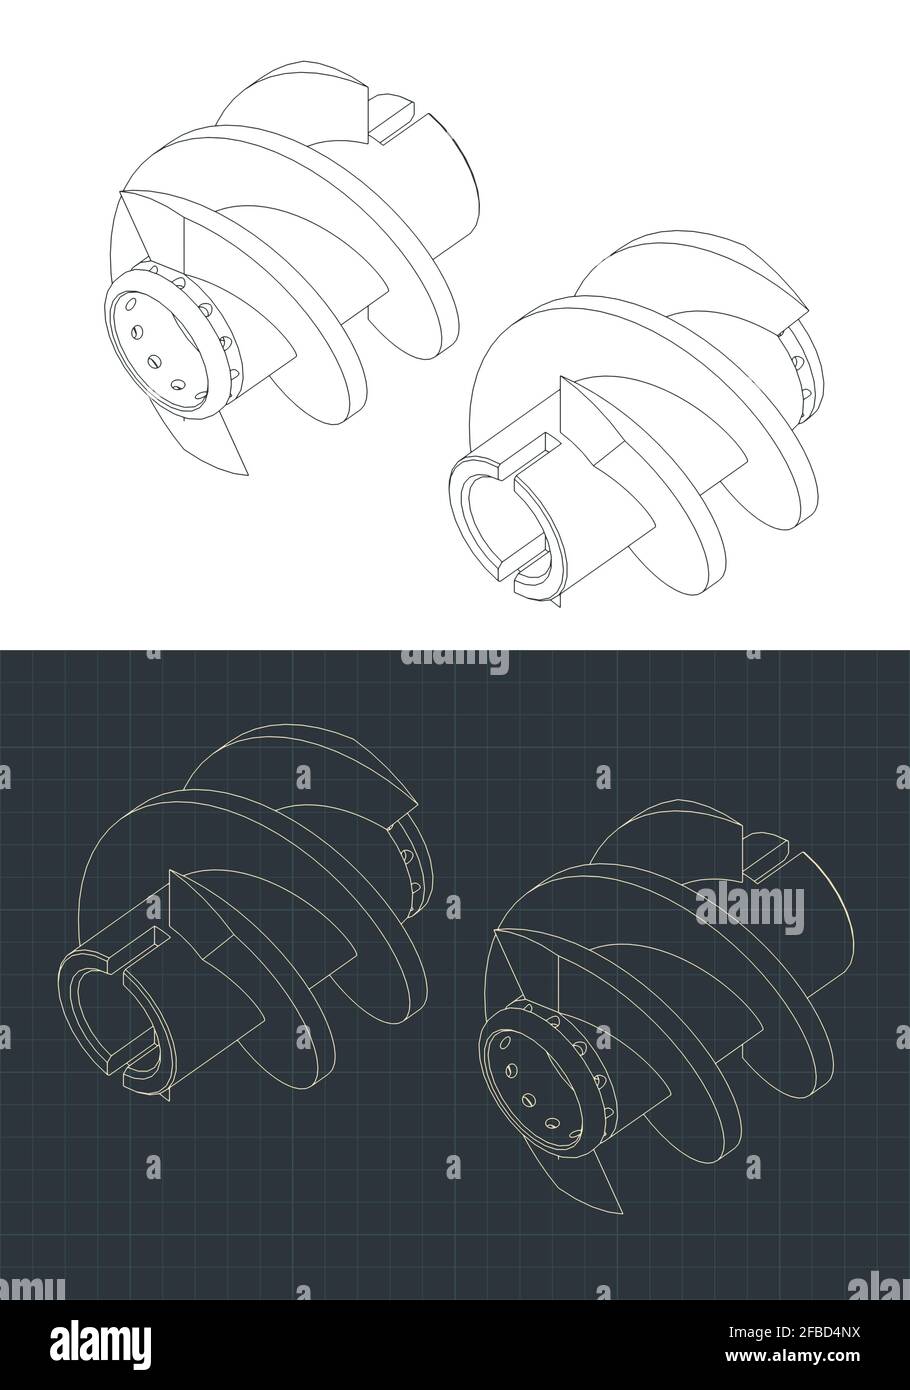 Stylized vector illustration of isometric drawings of inducer for cryogenic pump Stock Vector